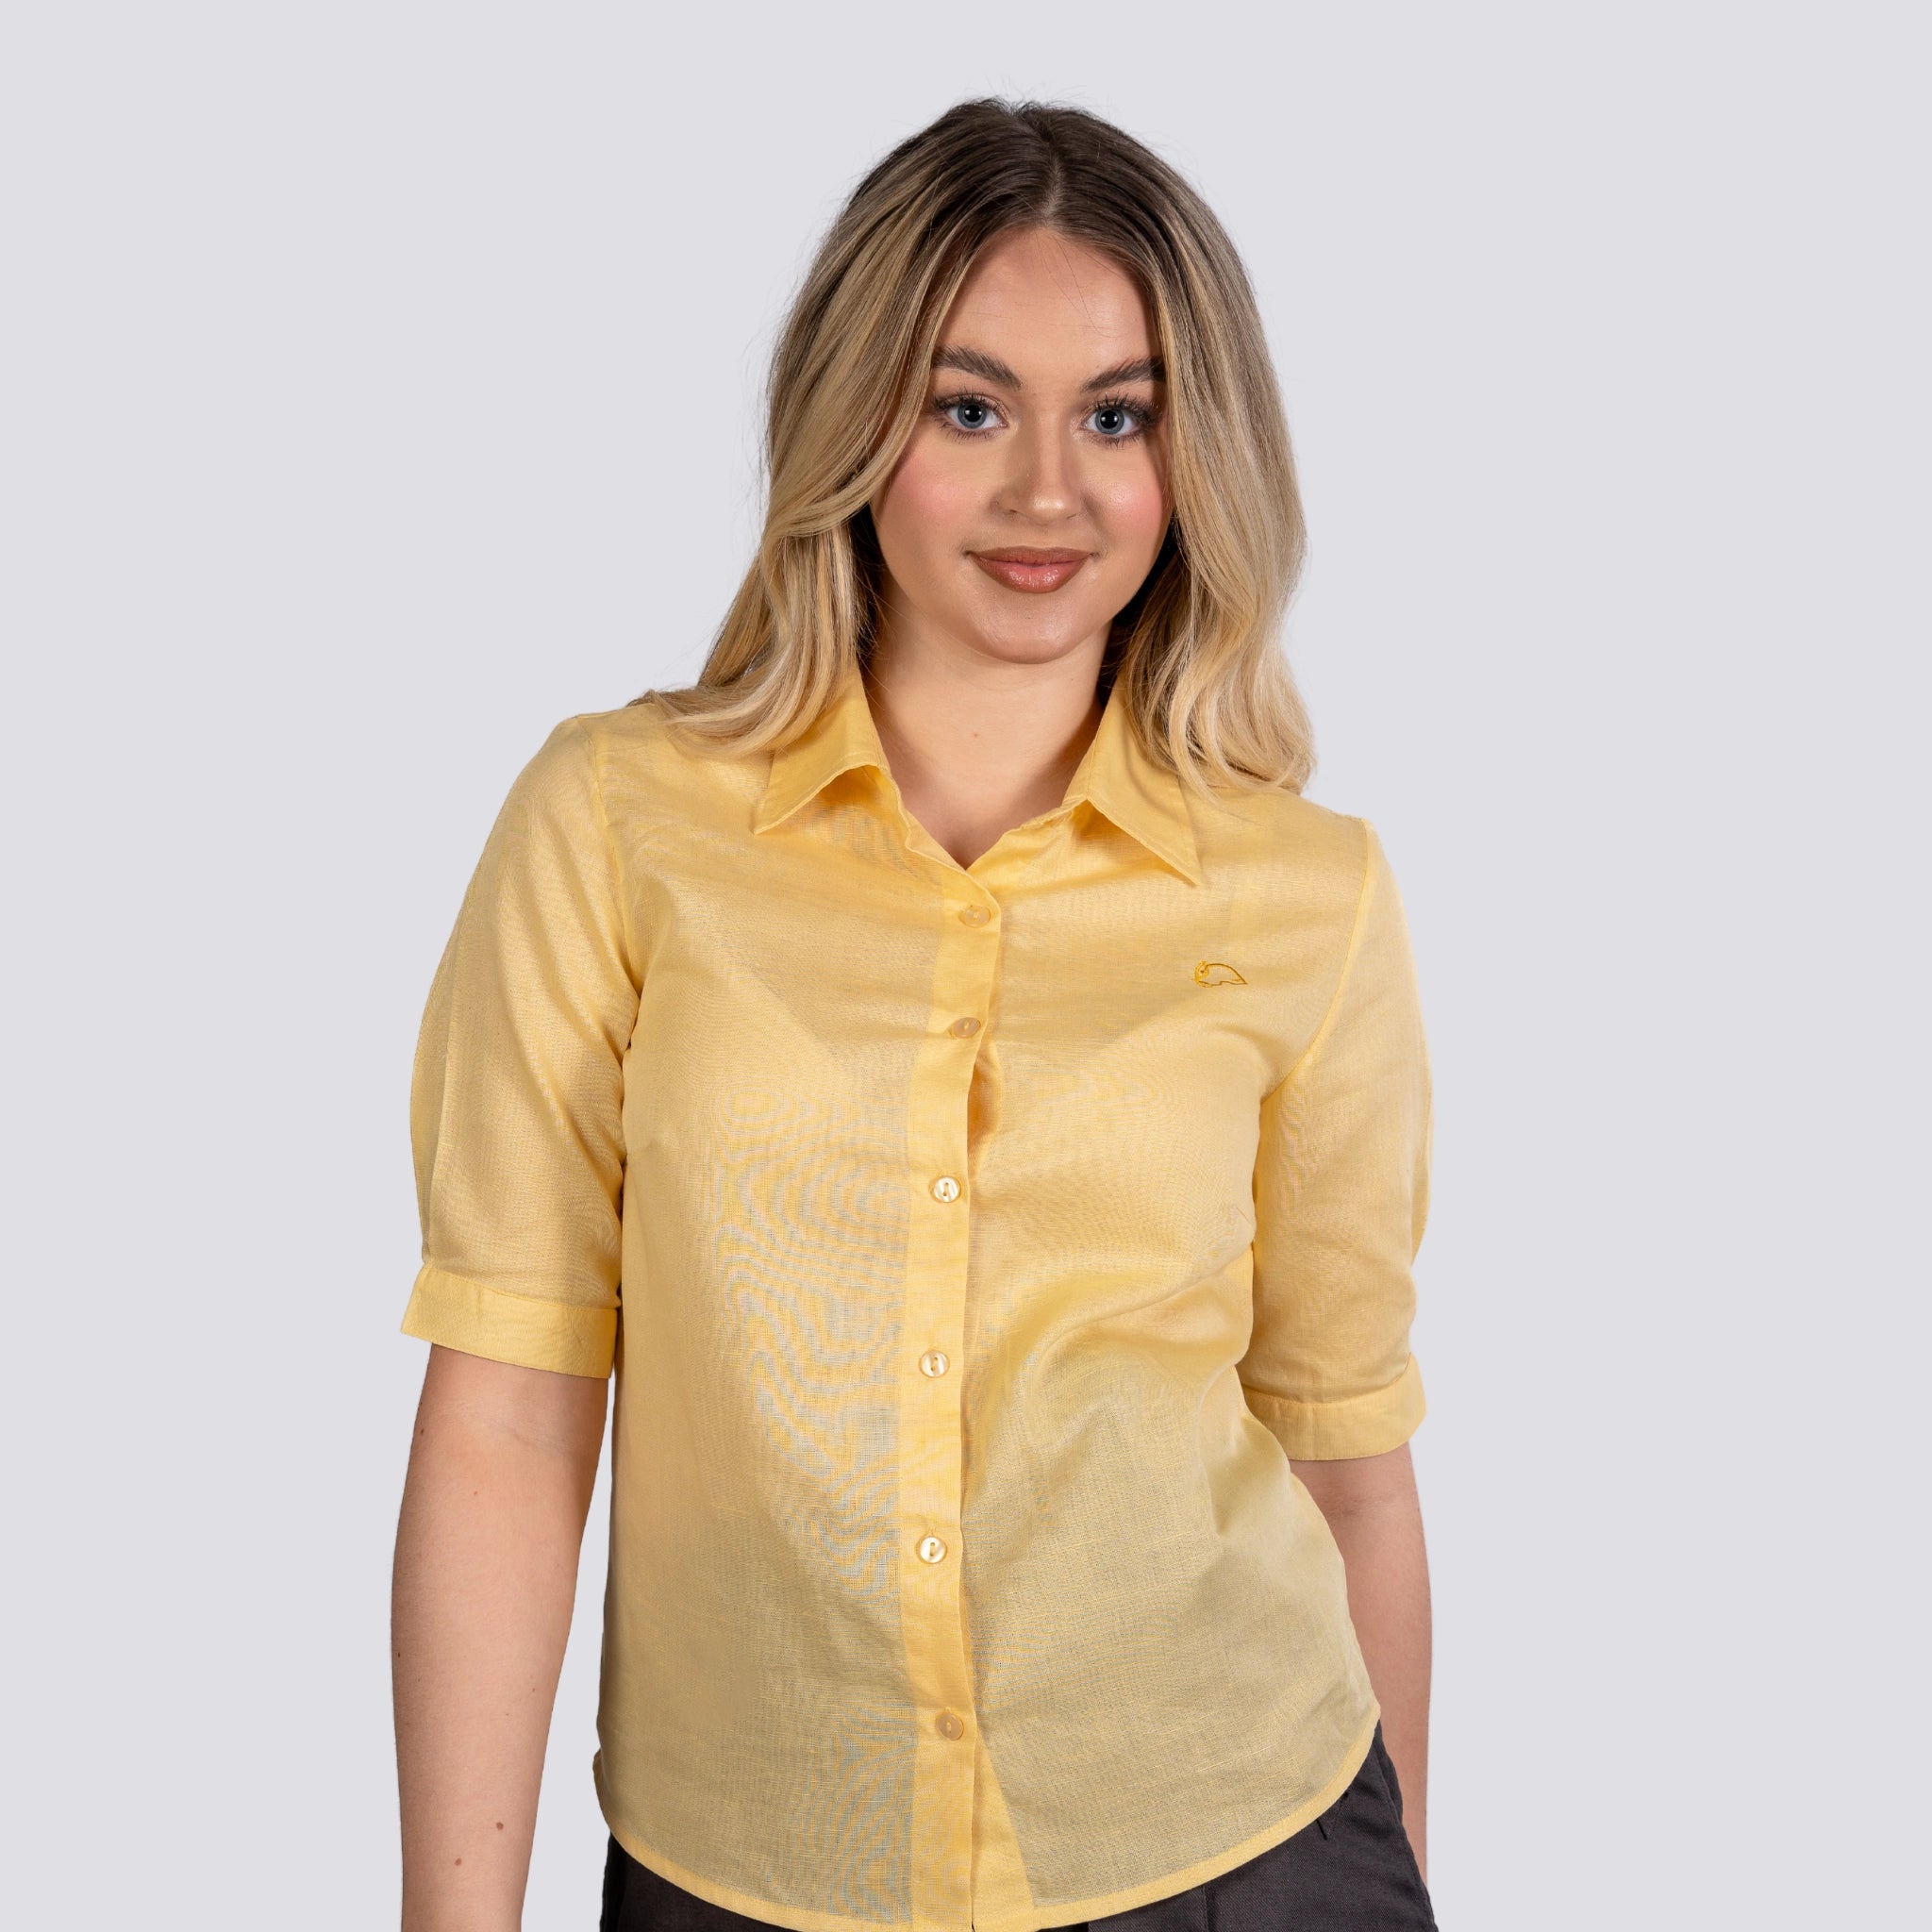 A young woman sporting a Karee Sunlit Breeze Yellow Linen Cotton Shirt For Women, standing against a gray background, smiling slightly at the camera.